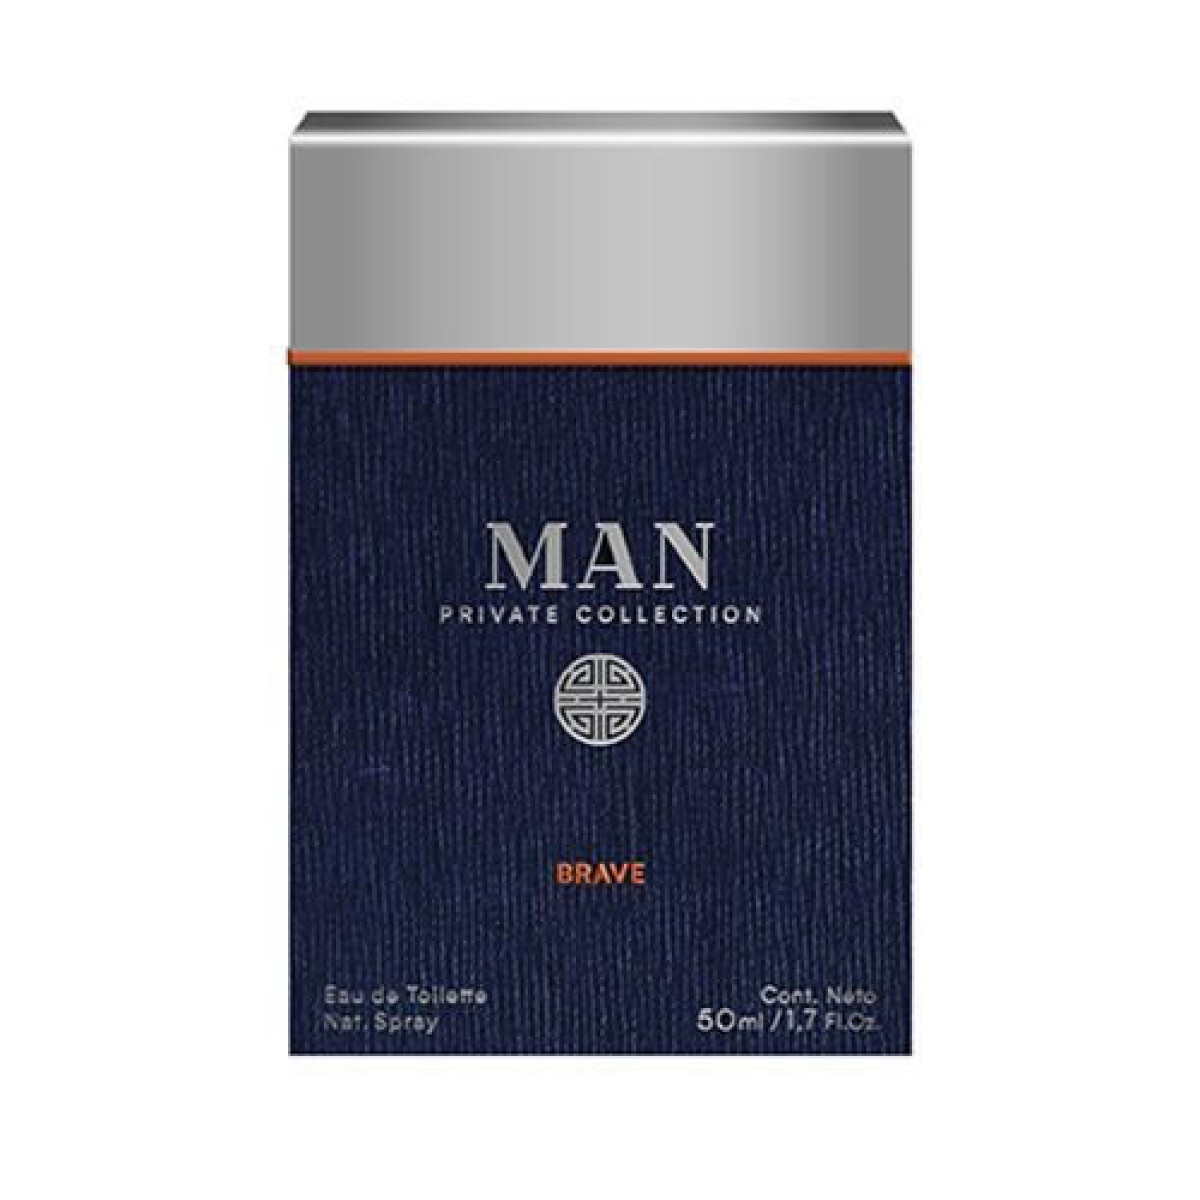 FRAGANCIA MAN PRIVATE COLLECTION BRAVE NATURAL EDT 50 ML 